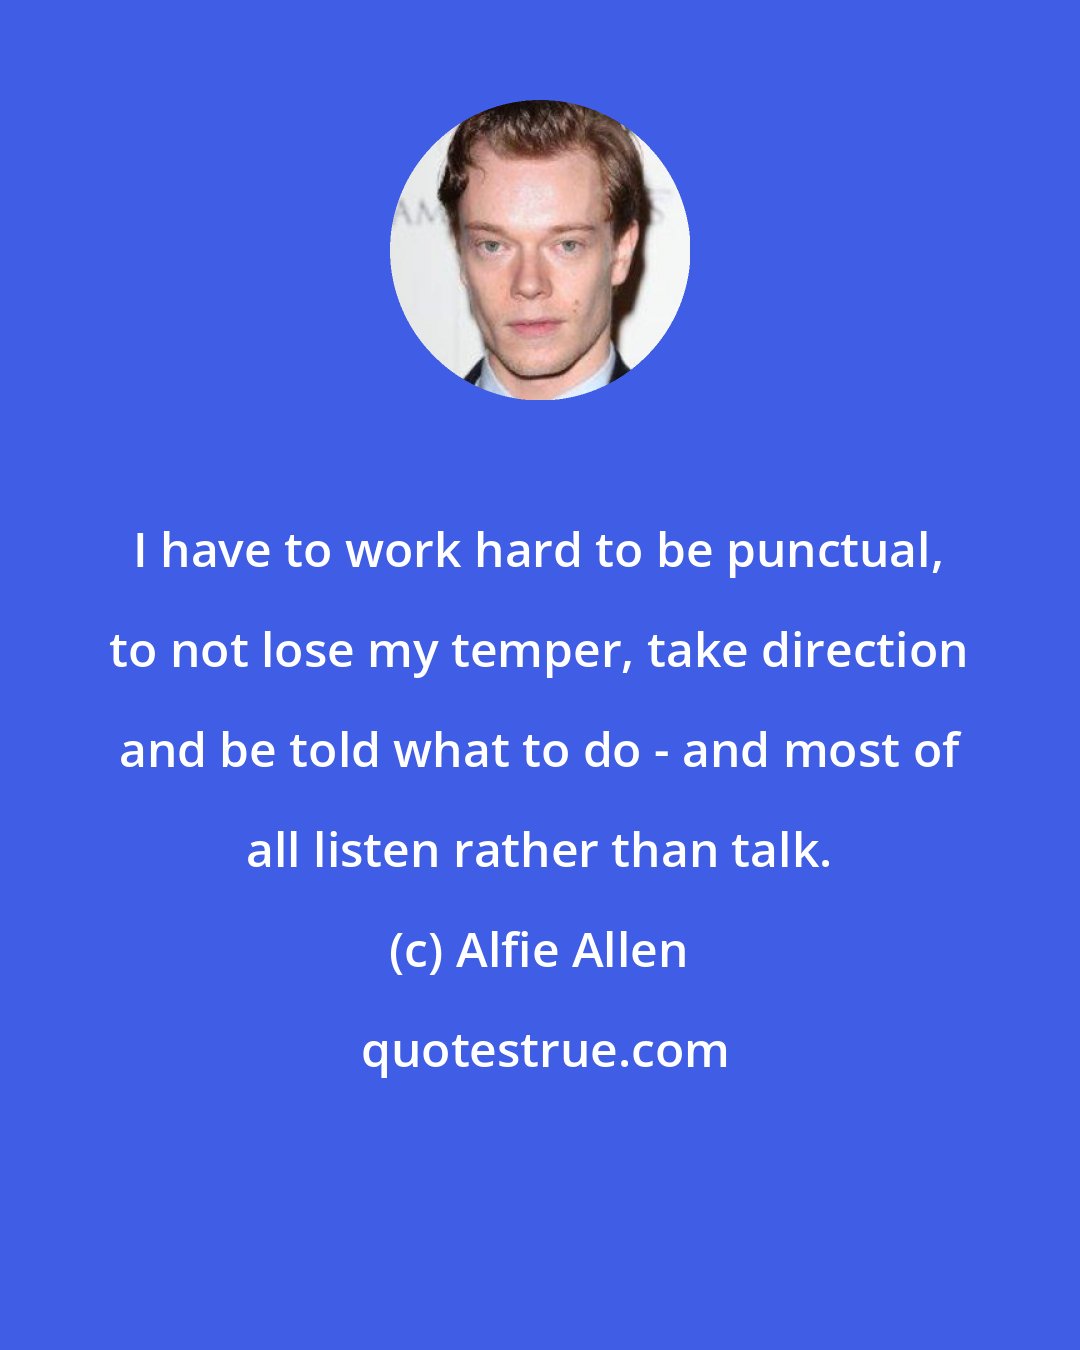 Alfie Allen: I have to work hard to be punctual, to not lose my temper, take direction and be told what to do - and most of all listen rather than talk.